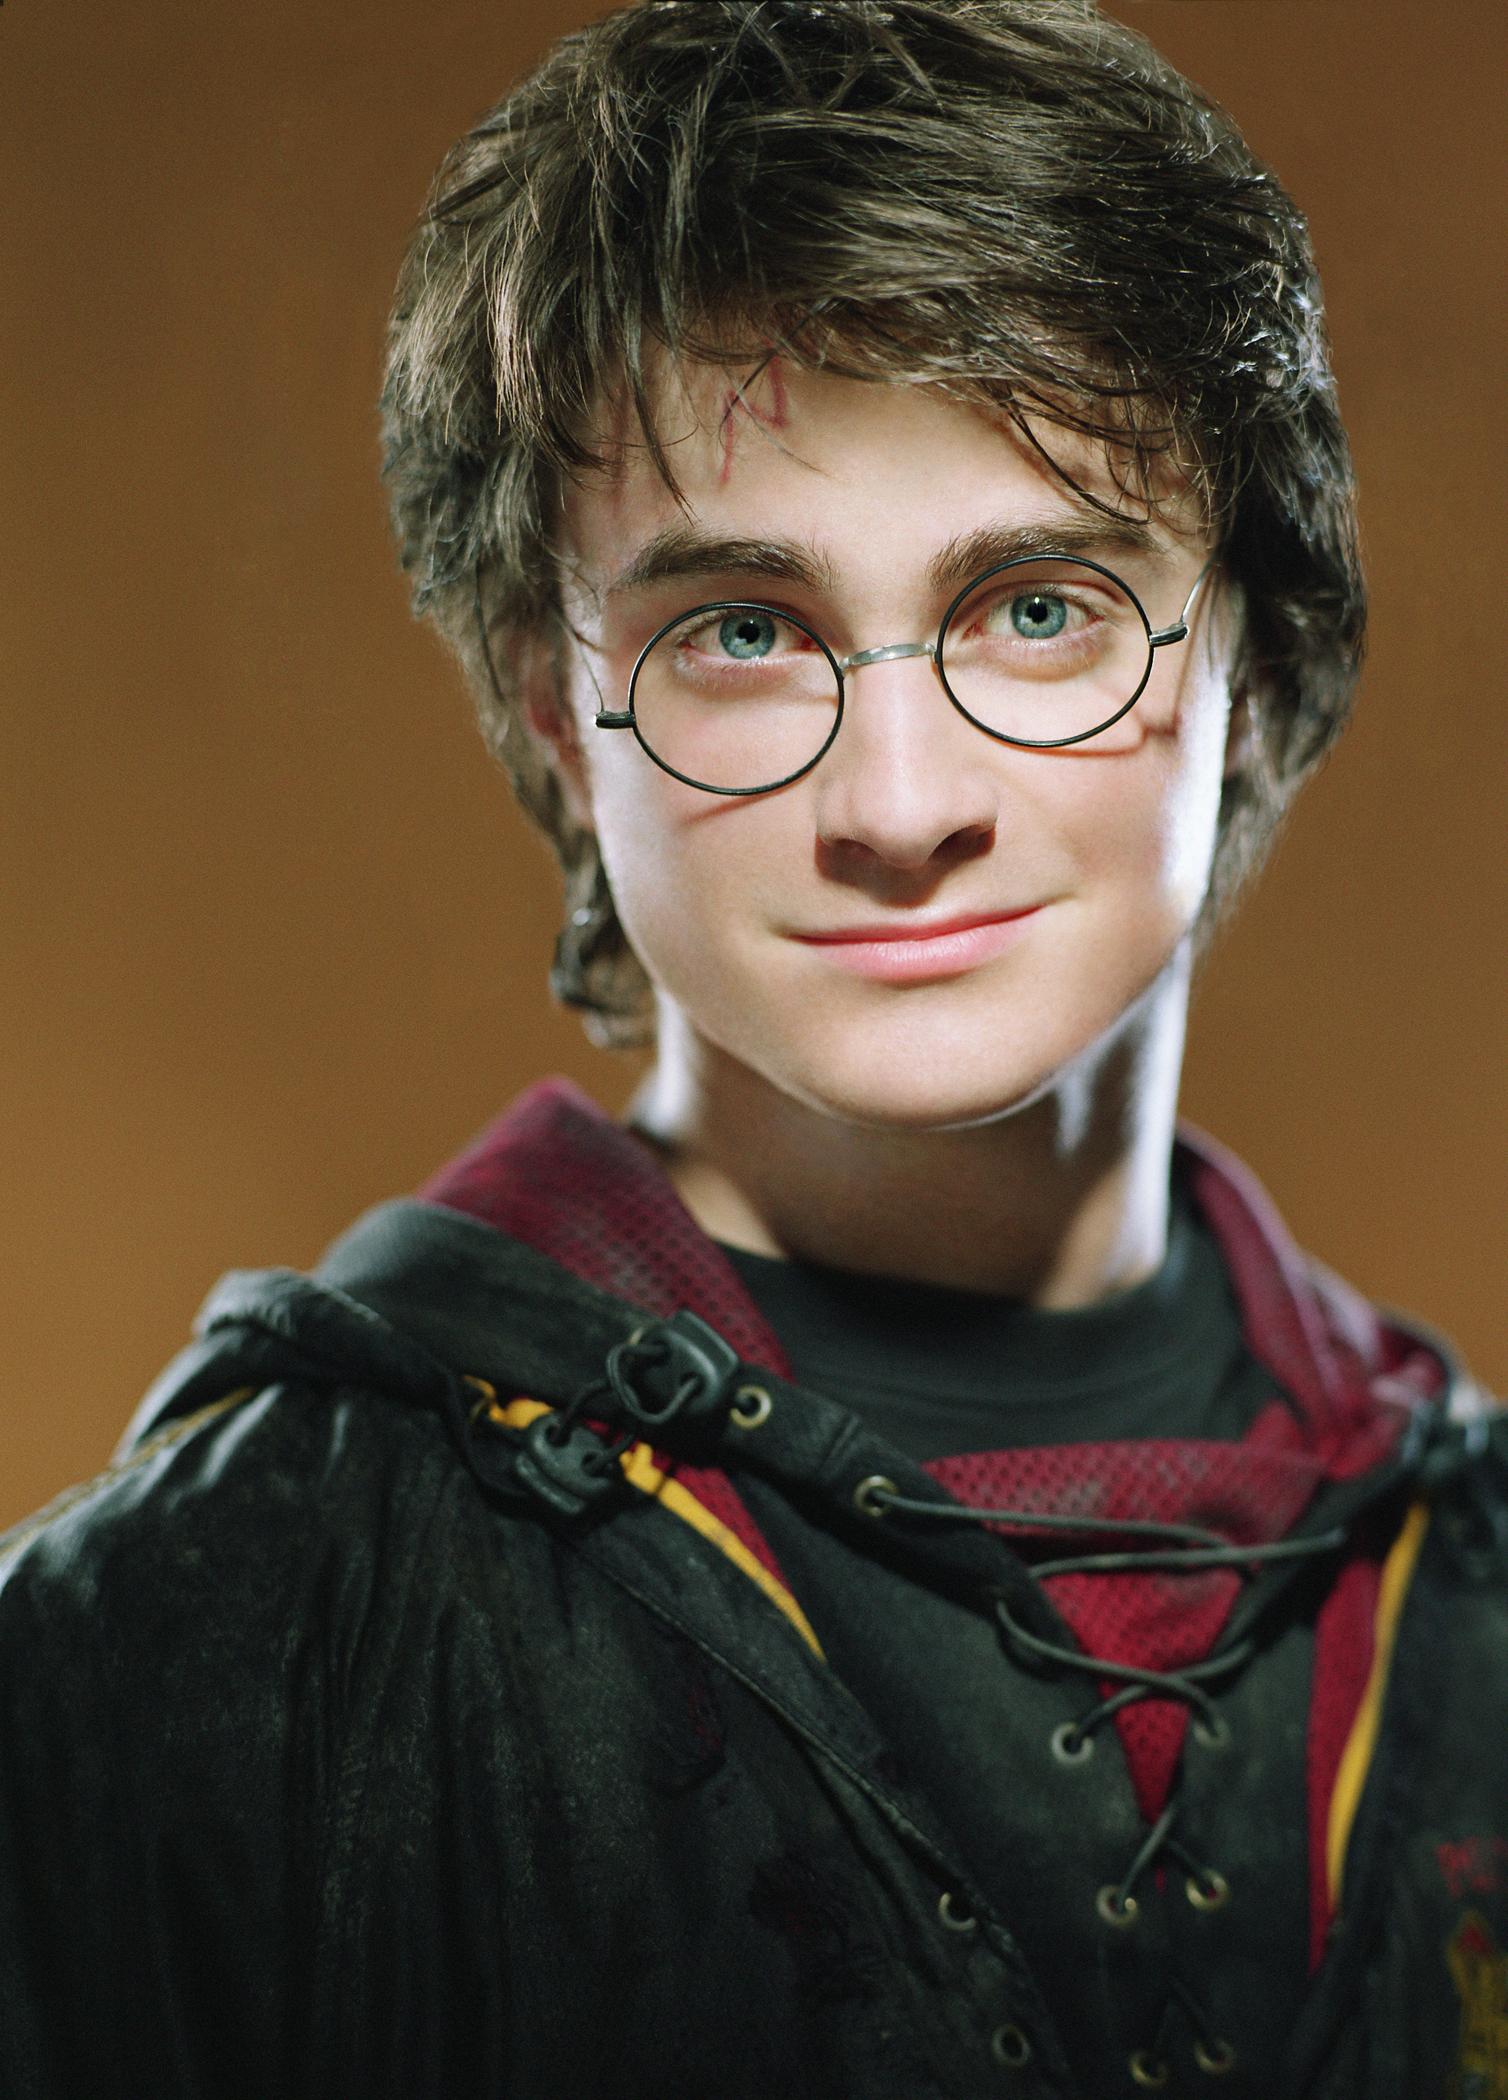 http://images4.wikia.nocookie.net/__cb20071105171228/harrypotter/fr/images/0/05/PromoHP4_Harry6.jpg